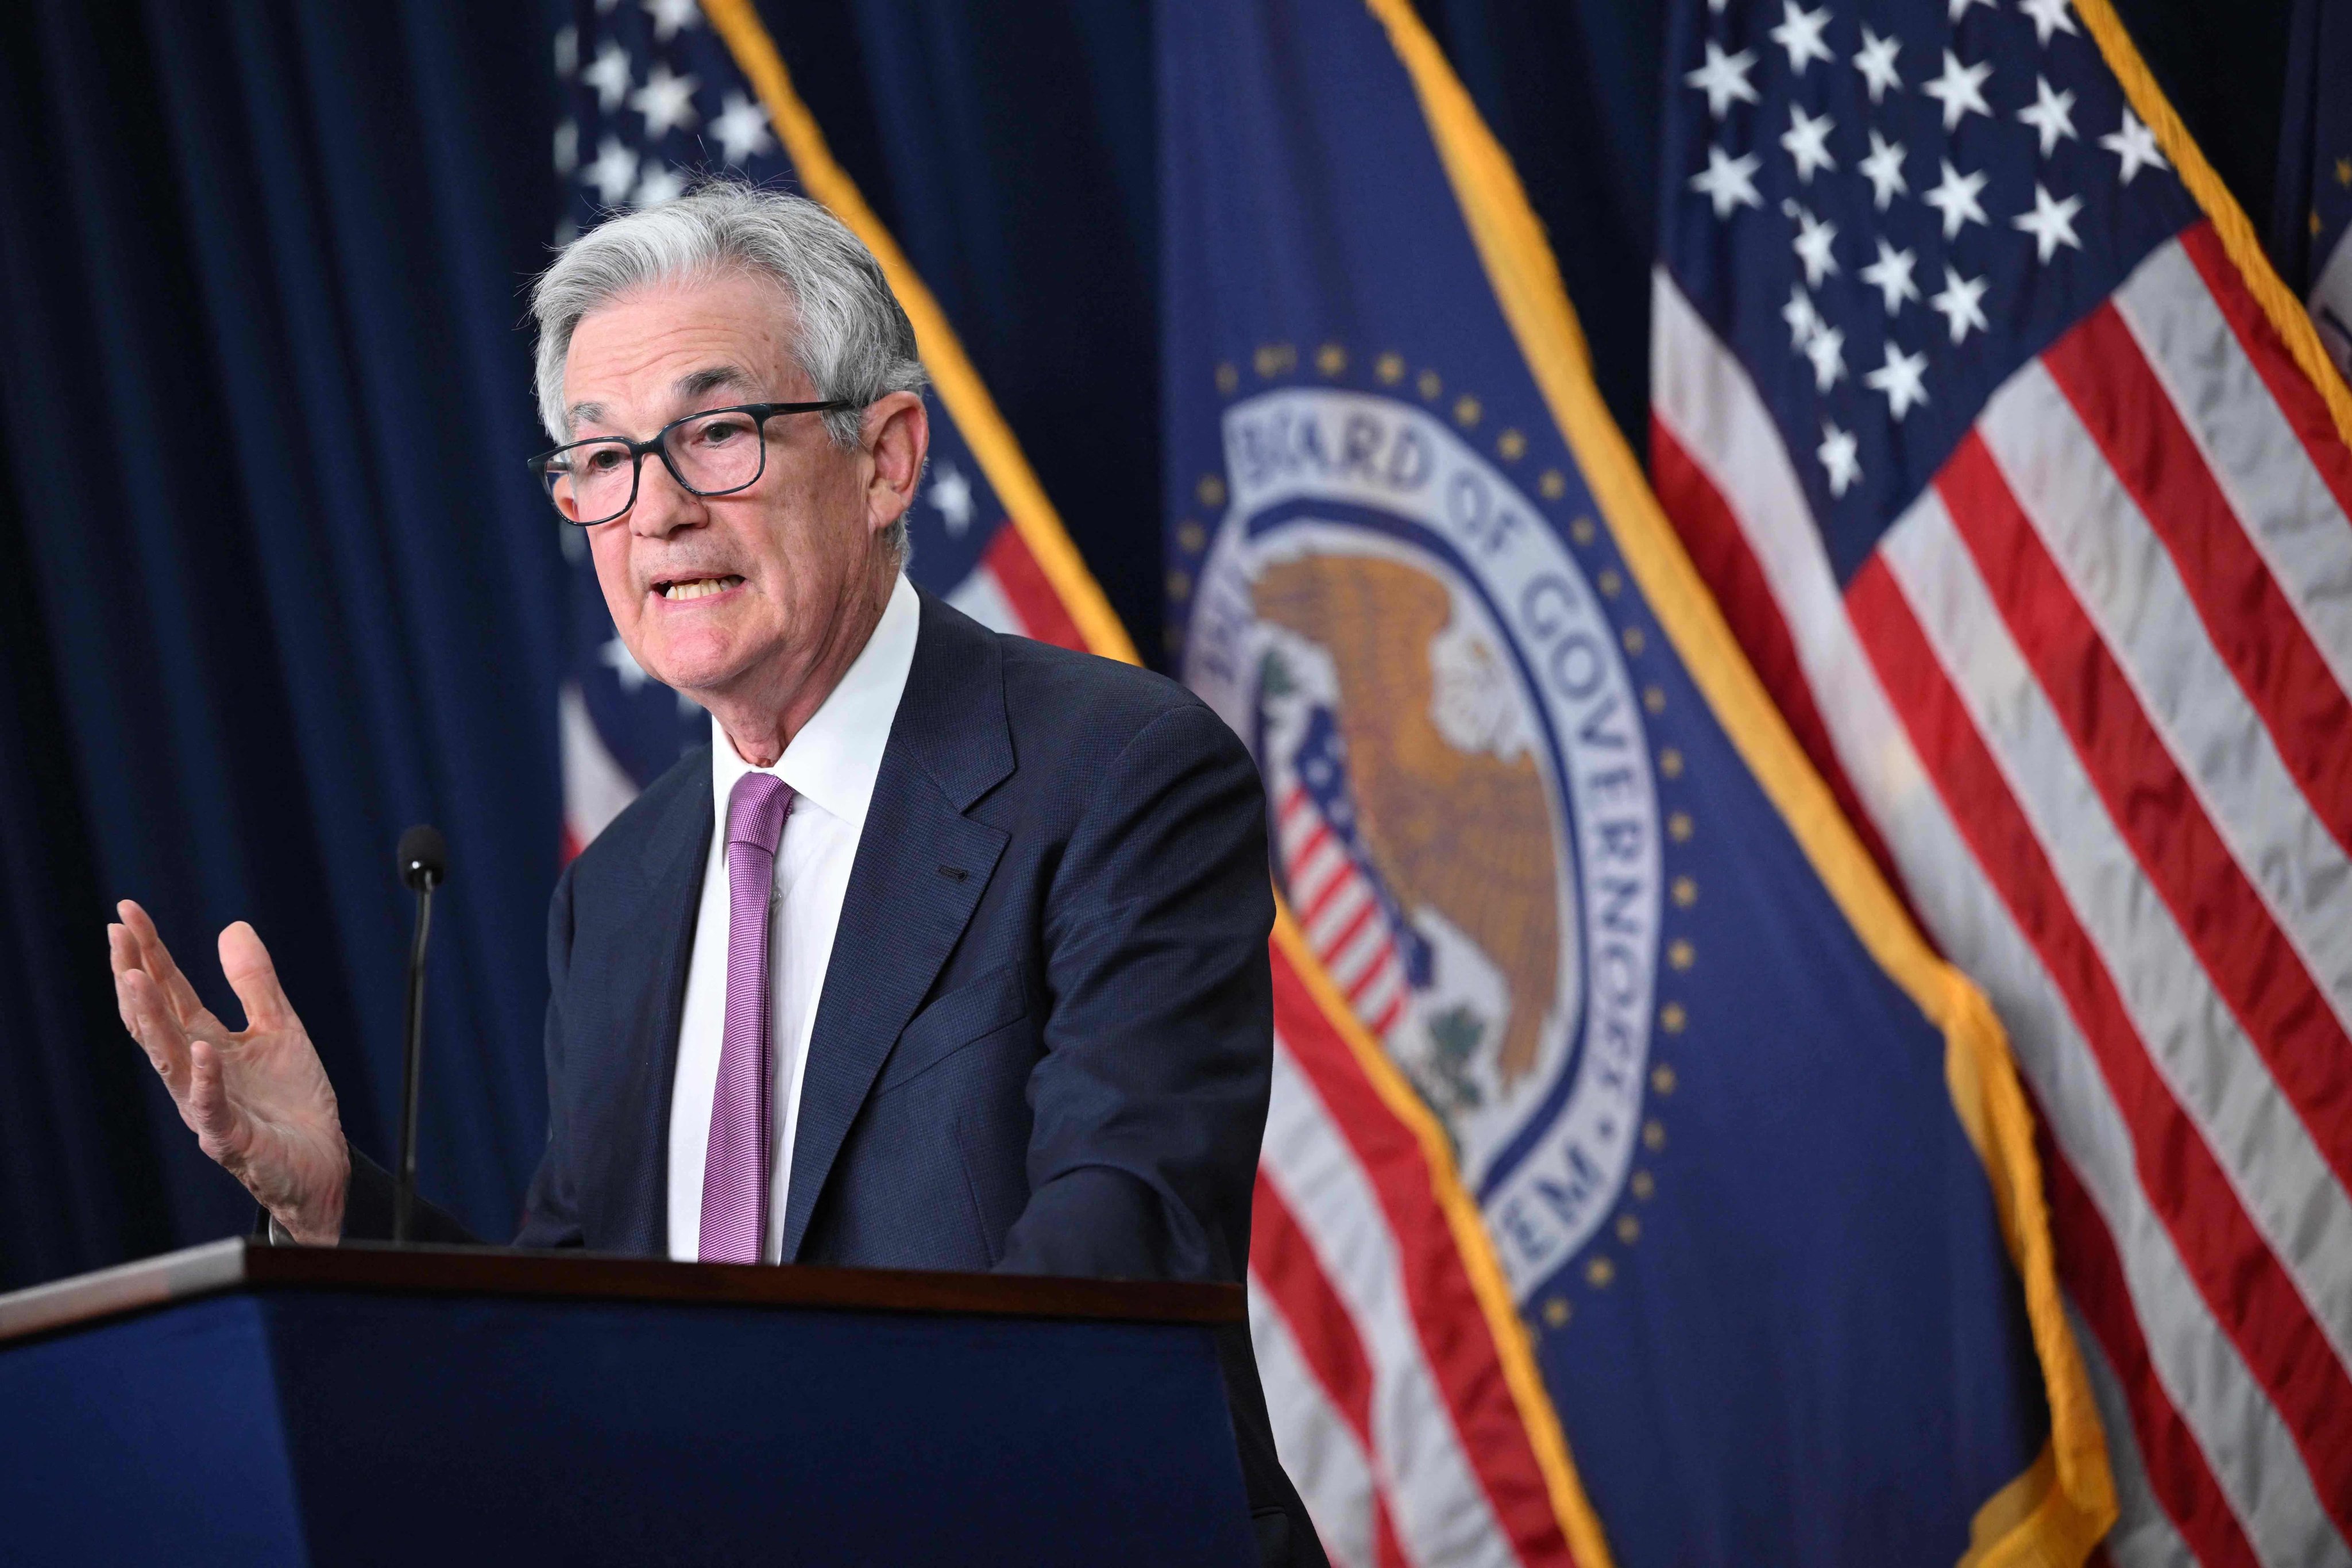 Federal Reserve Board chairman Jerome Powell speaks during a news conference on June 14 after the US central bank paused its aggressive campaign of interest rate hikes despite “elevated” inflation, while indicating a sharp increase could be needed before the end of the year. Photo: AFP